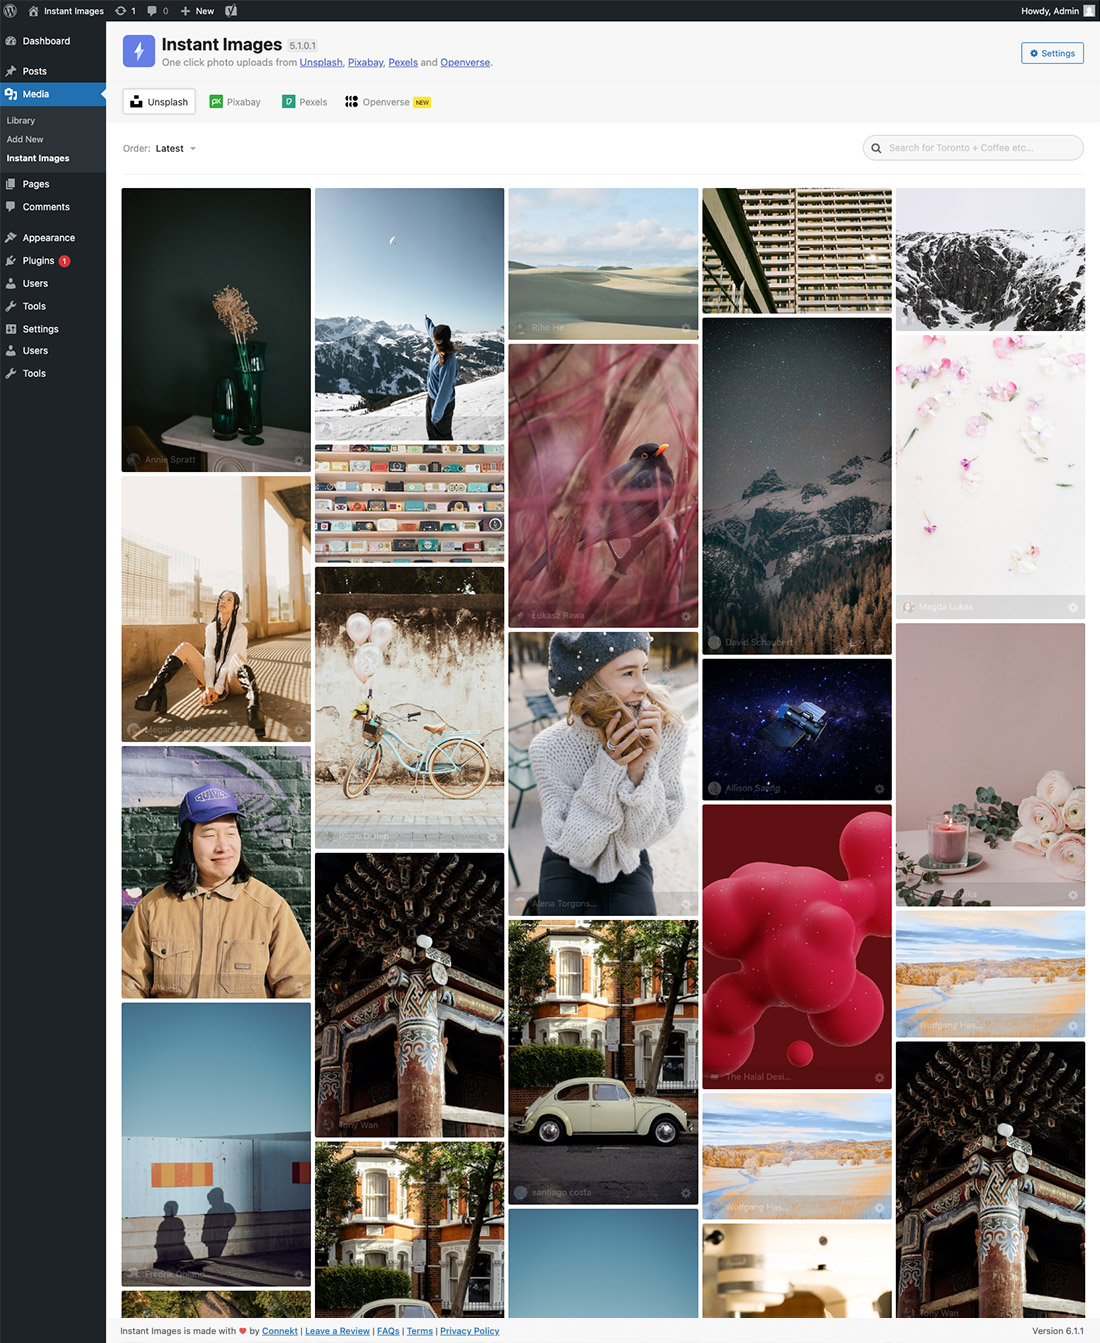 Dashboard - Browse, search and upload images to your WordPress media library